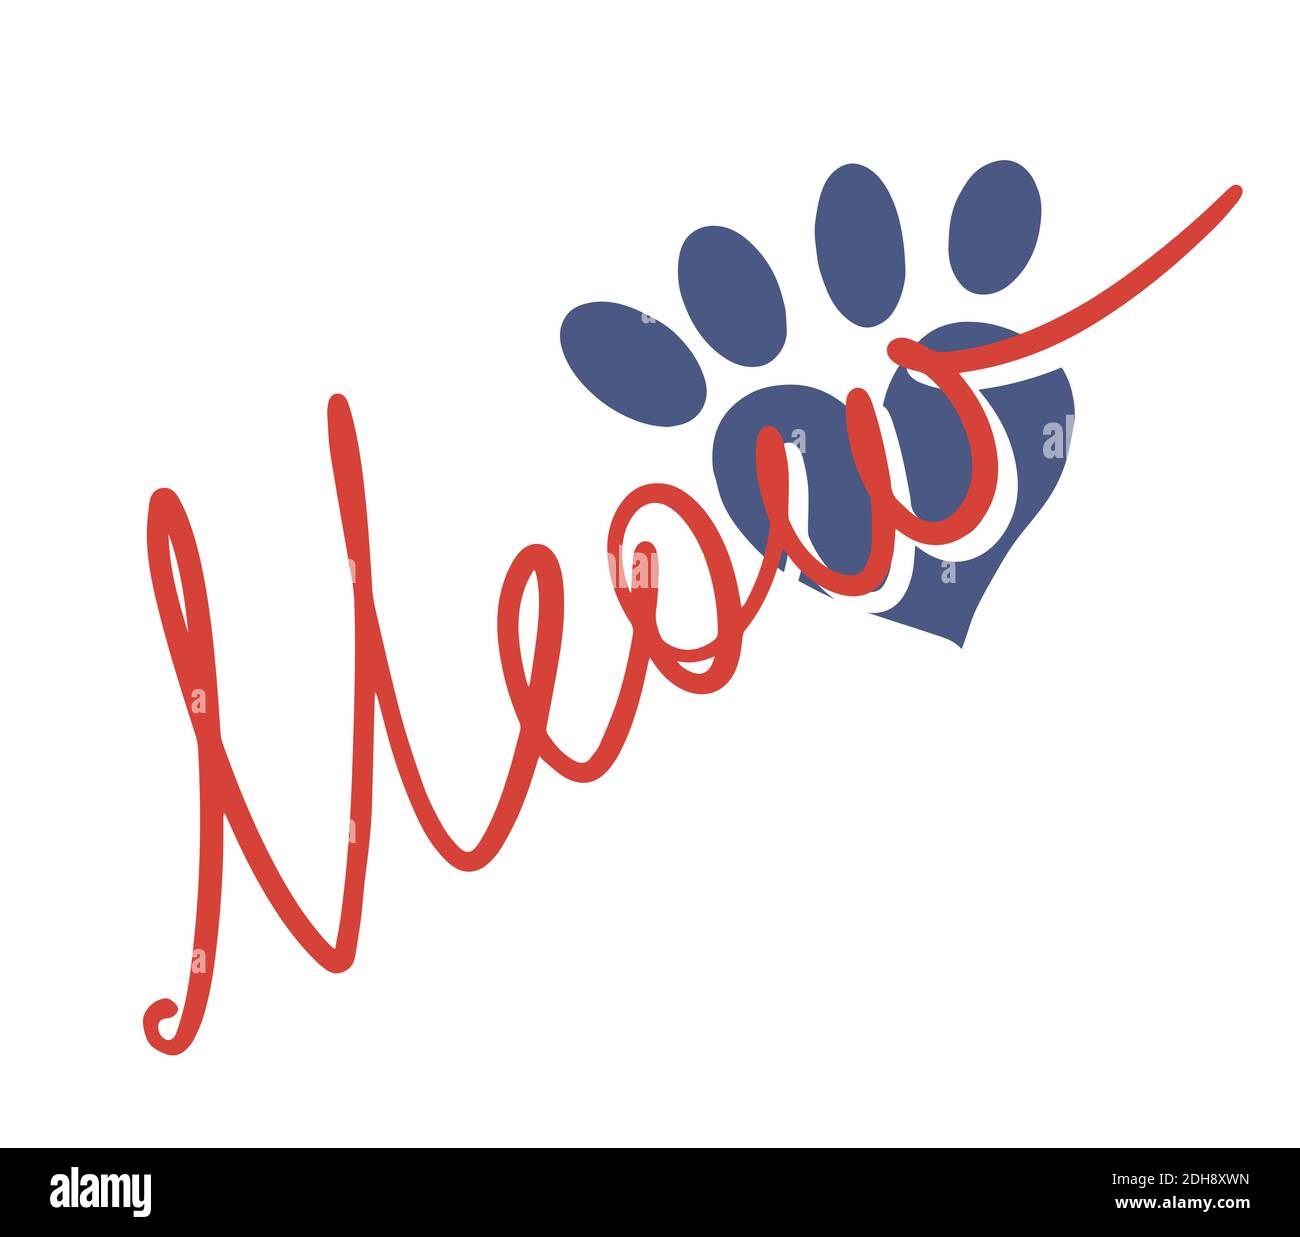 Lettering word meow isolated on white background with heart shaped cat paw print eps10 vector hand drawn illustration. Stock Vector